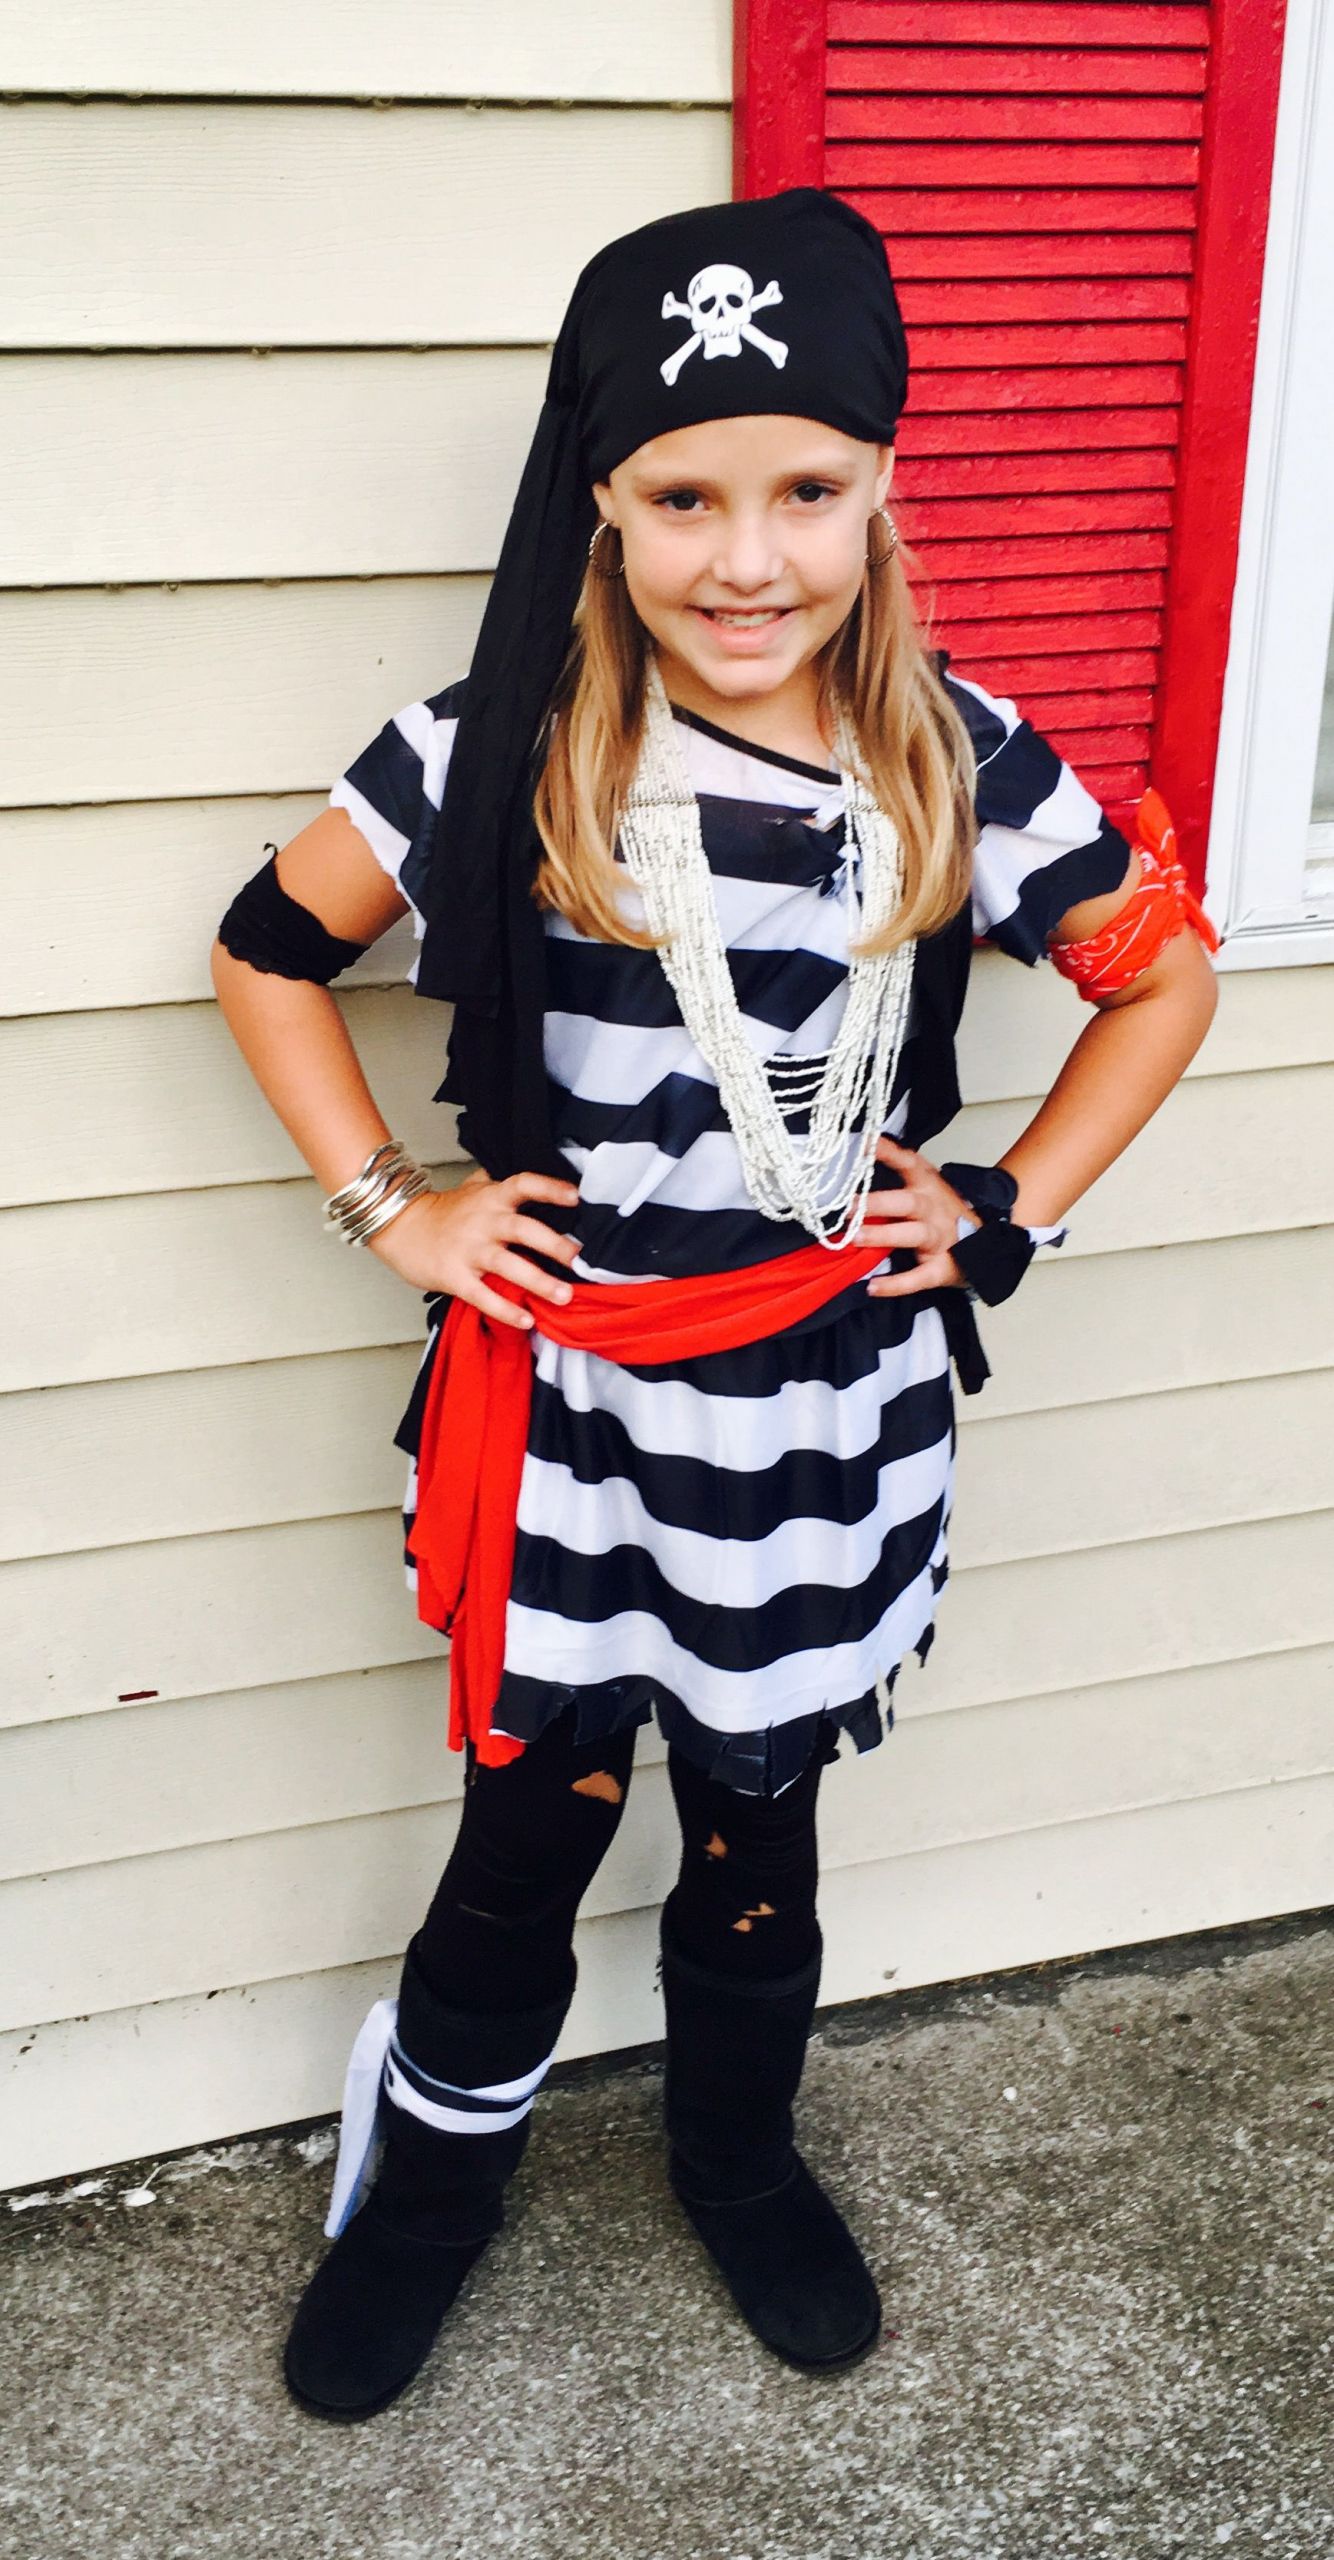 DIY Adult Pirate Costume
 Easy girl s pirate costume made from cheap adult size